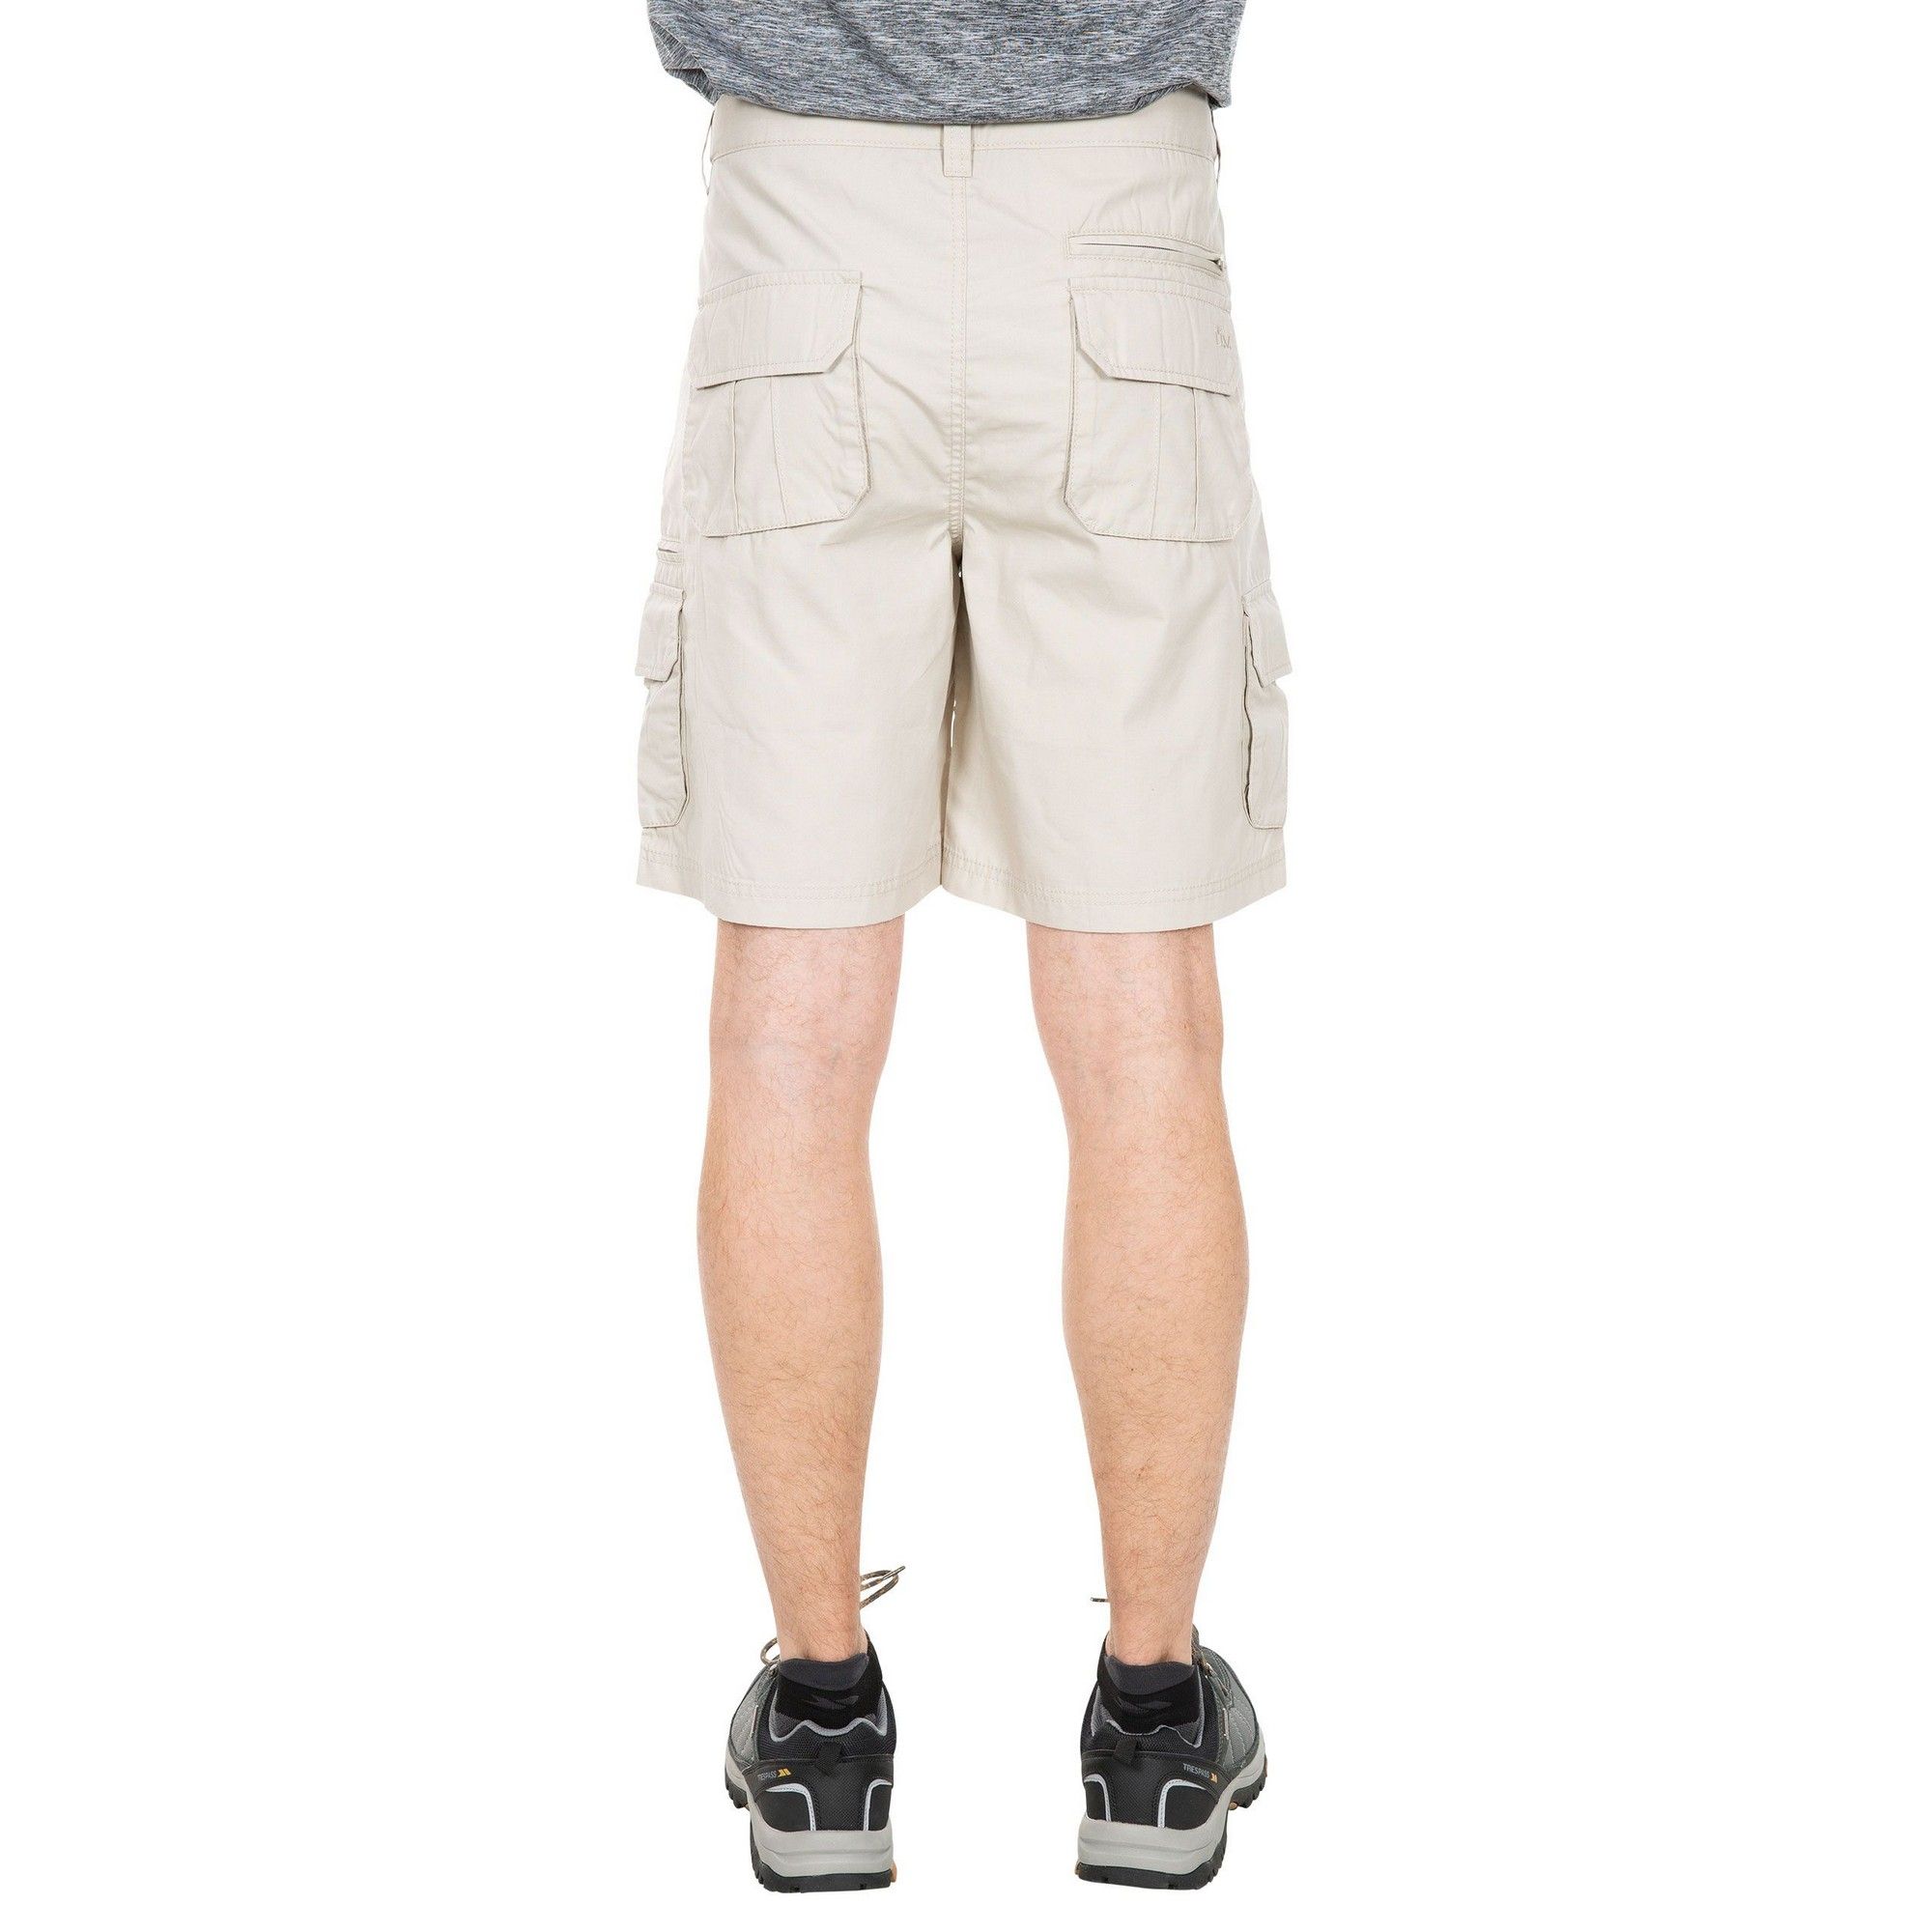 Mens hiking shorts. Water repellent finish. UPF40+ protective fabric. Moisture wicking and quick drying. 2 zipped pockets, 1 concealed zipped pocket, 2 side pockets and 4 bellow patch pockets. Elasticated back panel with side adjusters. 65% Polyester, 35% Cotton.